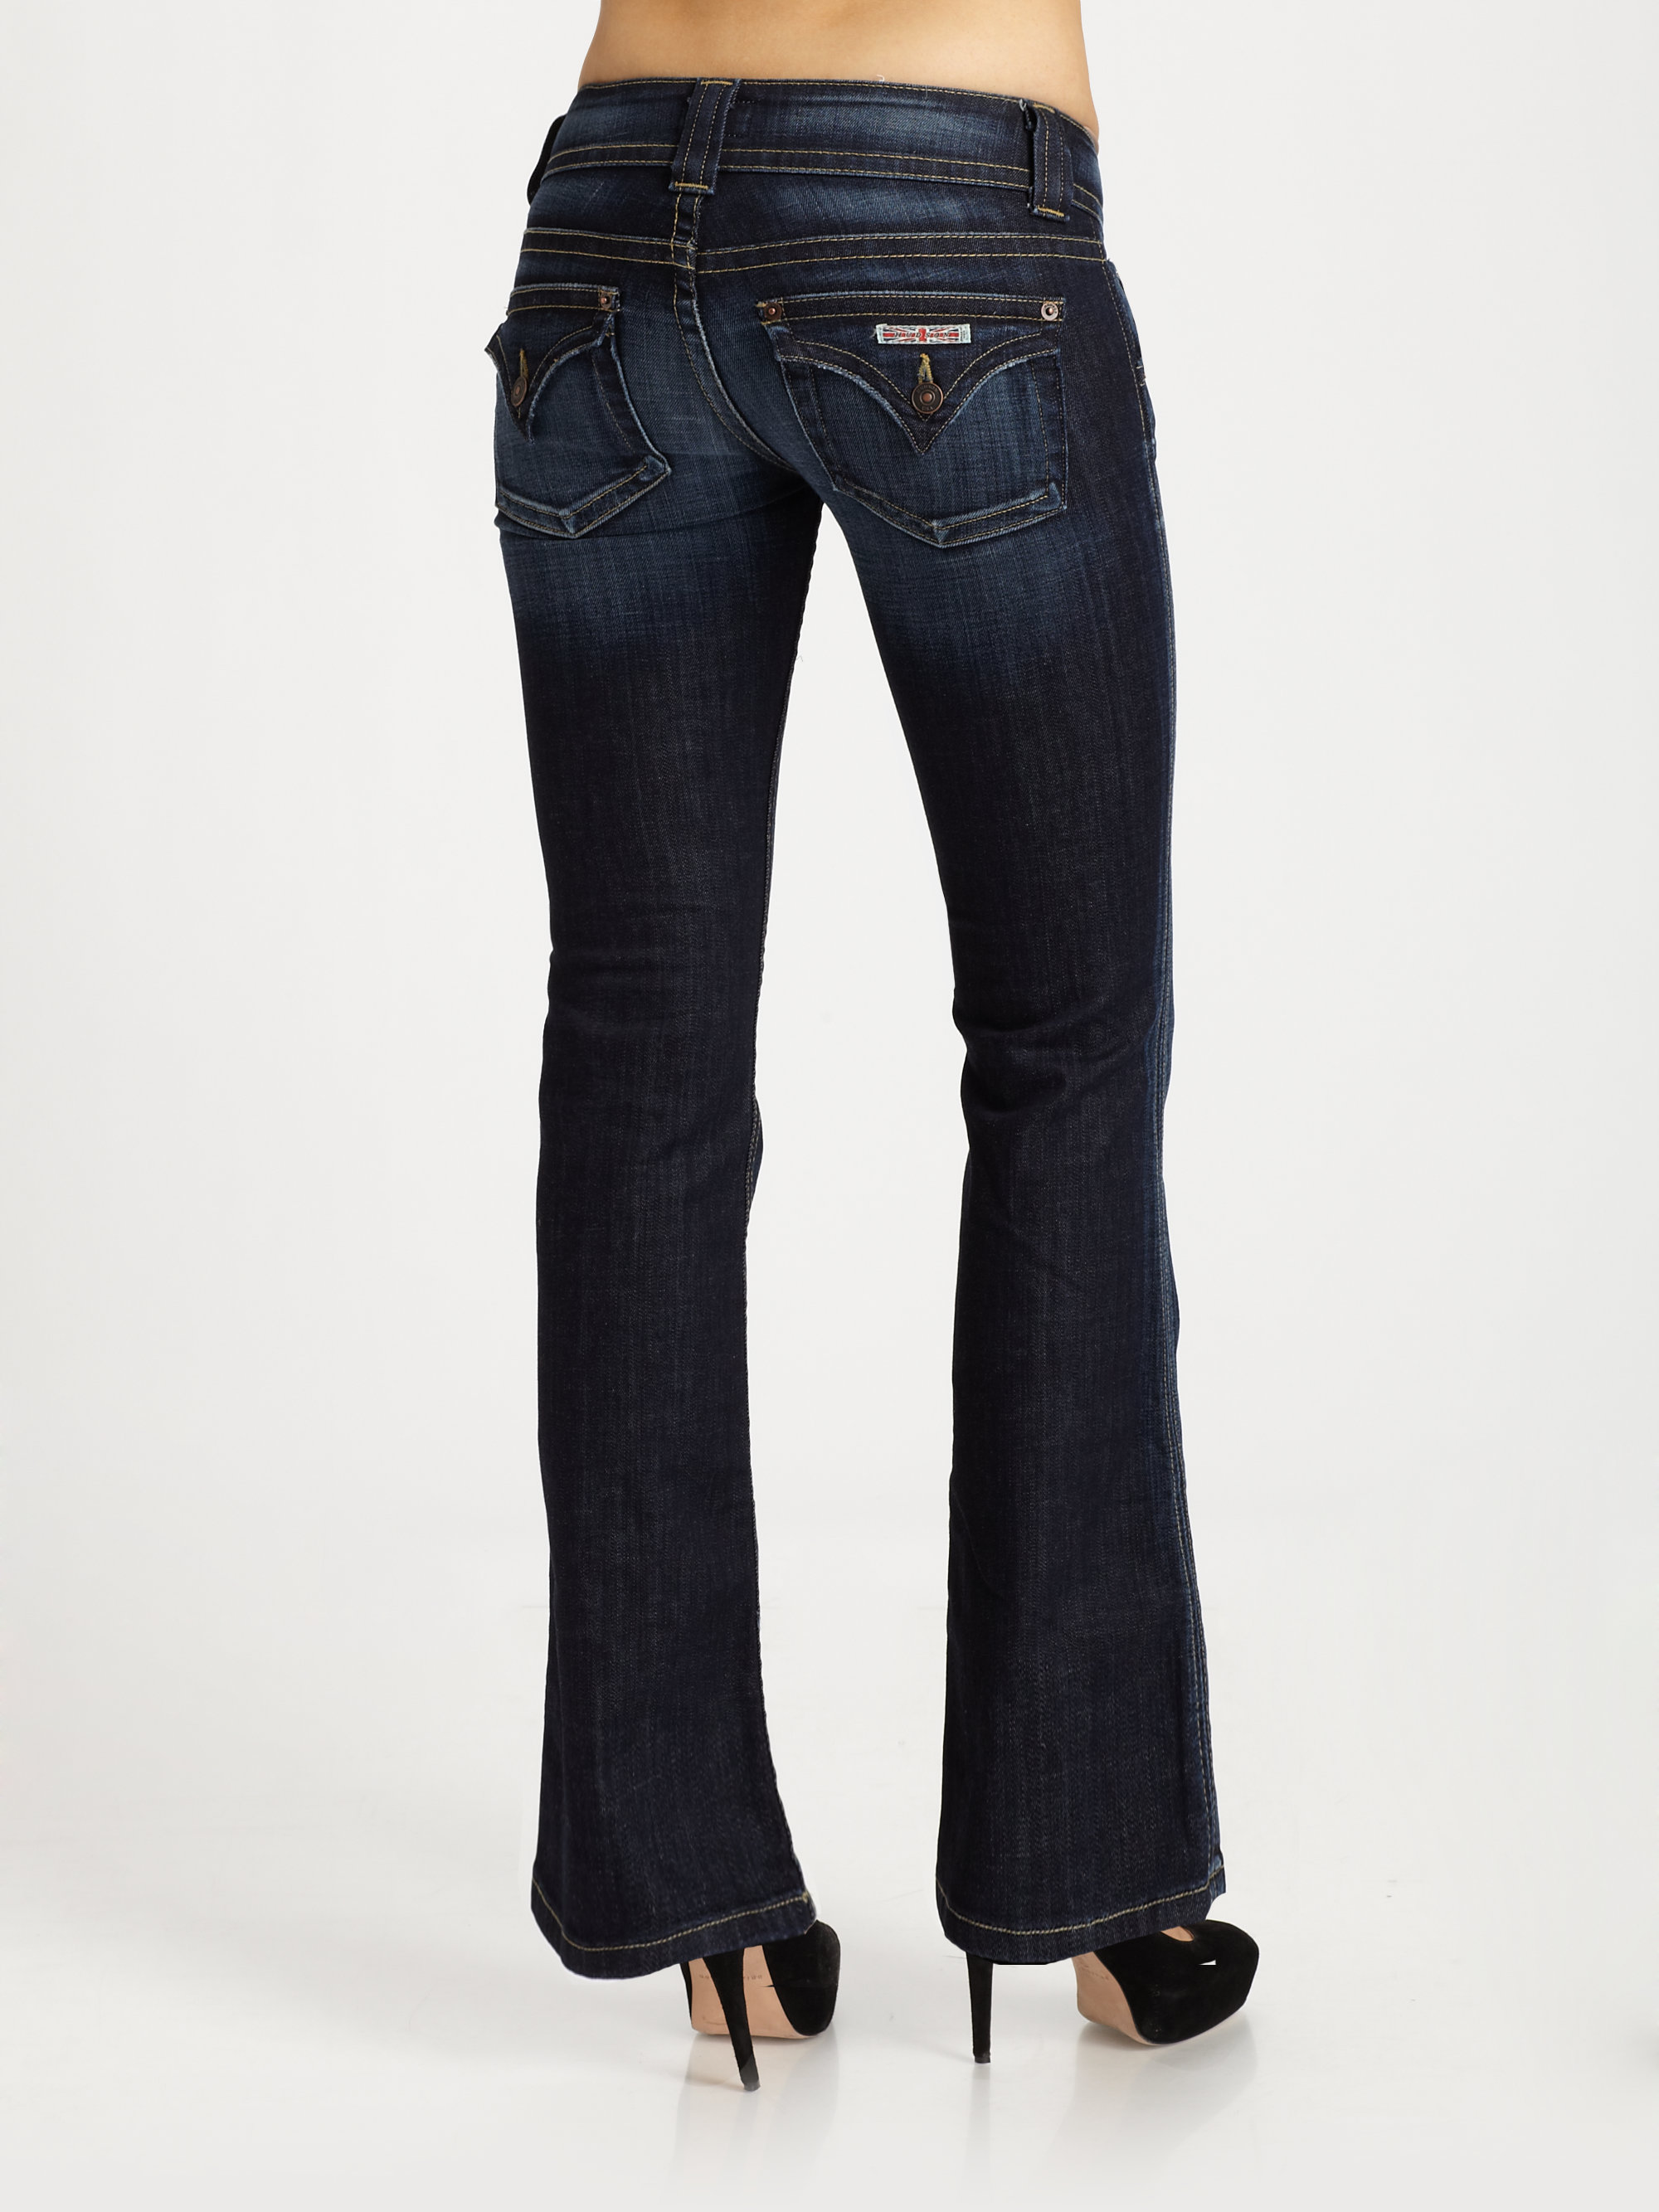 Lyst - Hudson Jeans Petite Signature Bootcut Jeans in Blue